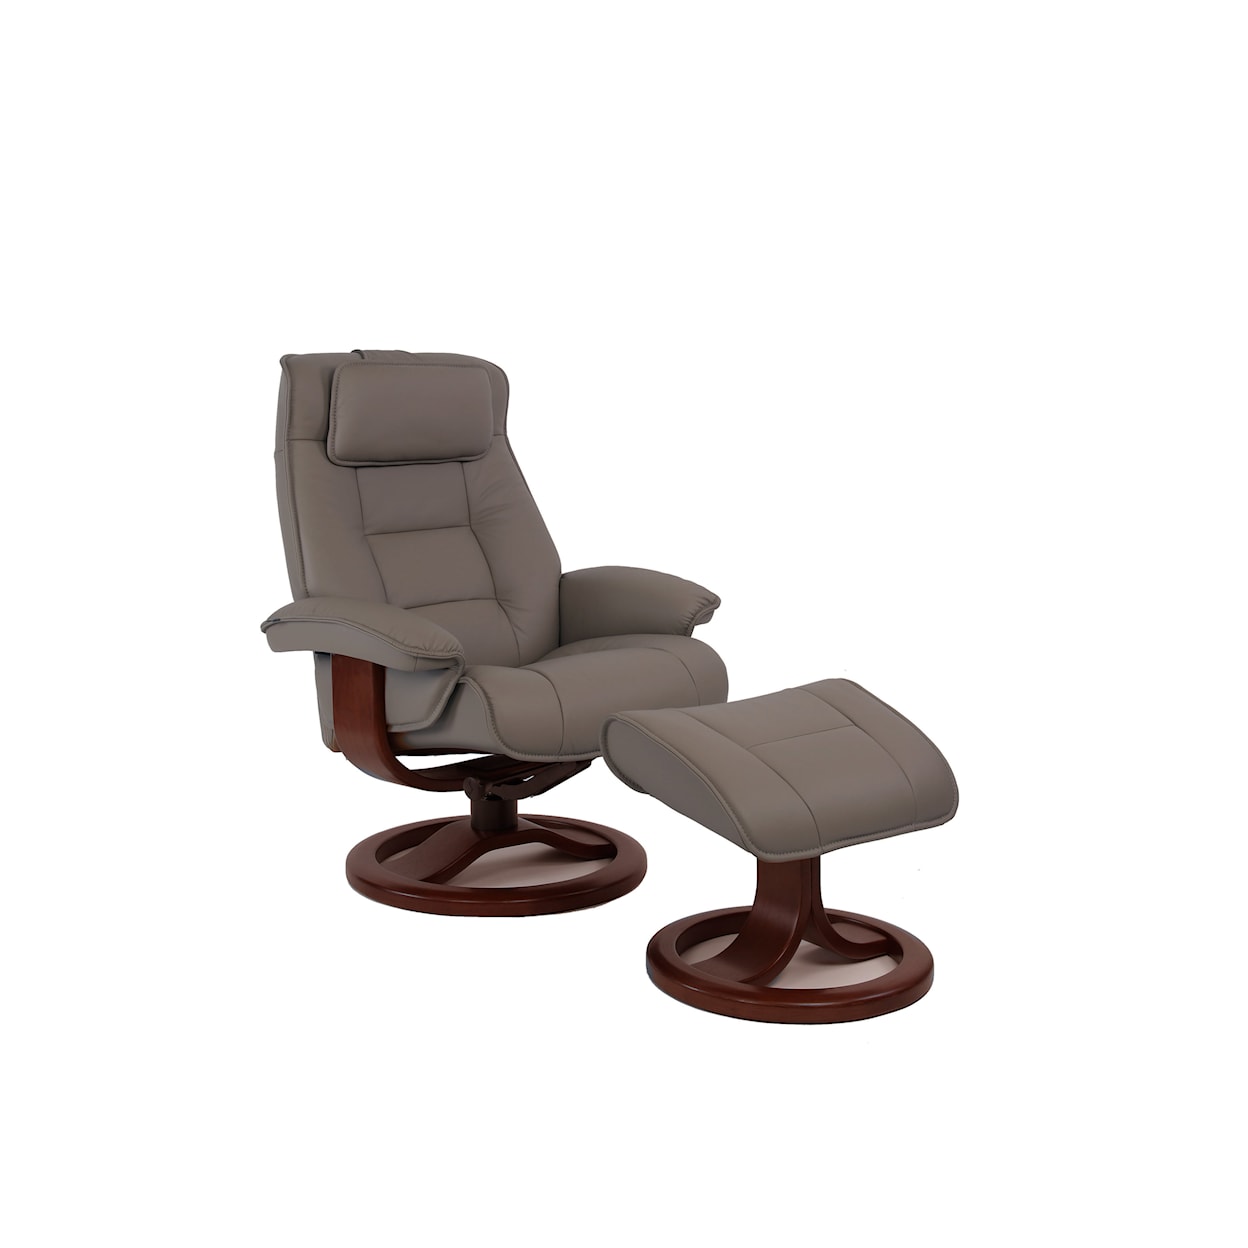 Fjords by Hjellegjerde Classic Comfort Collection Mustang R Small Manual Recliner W/ Footstool